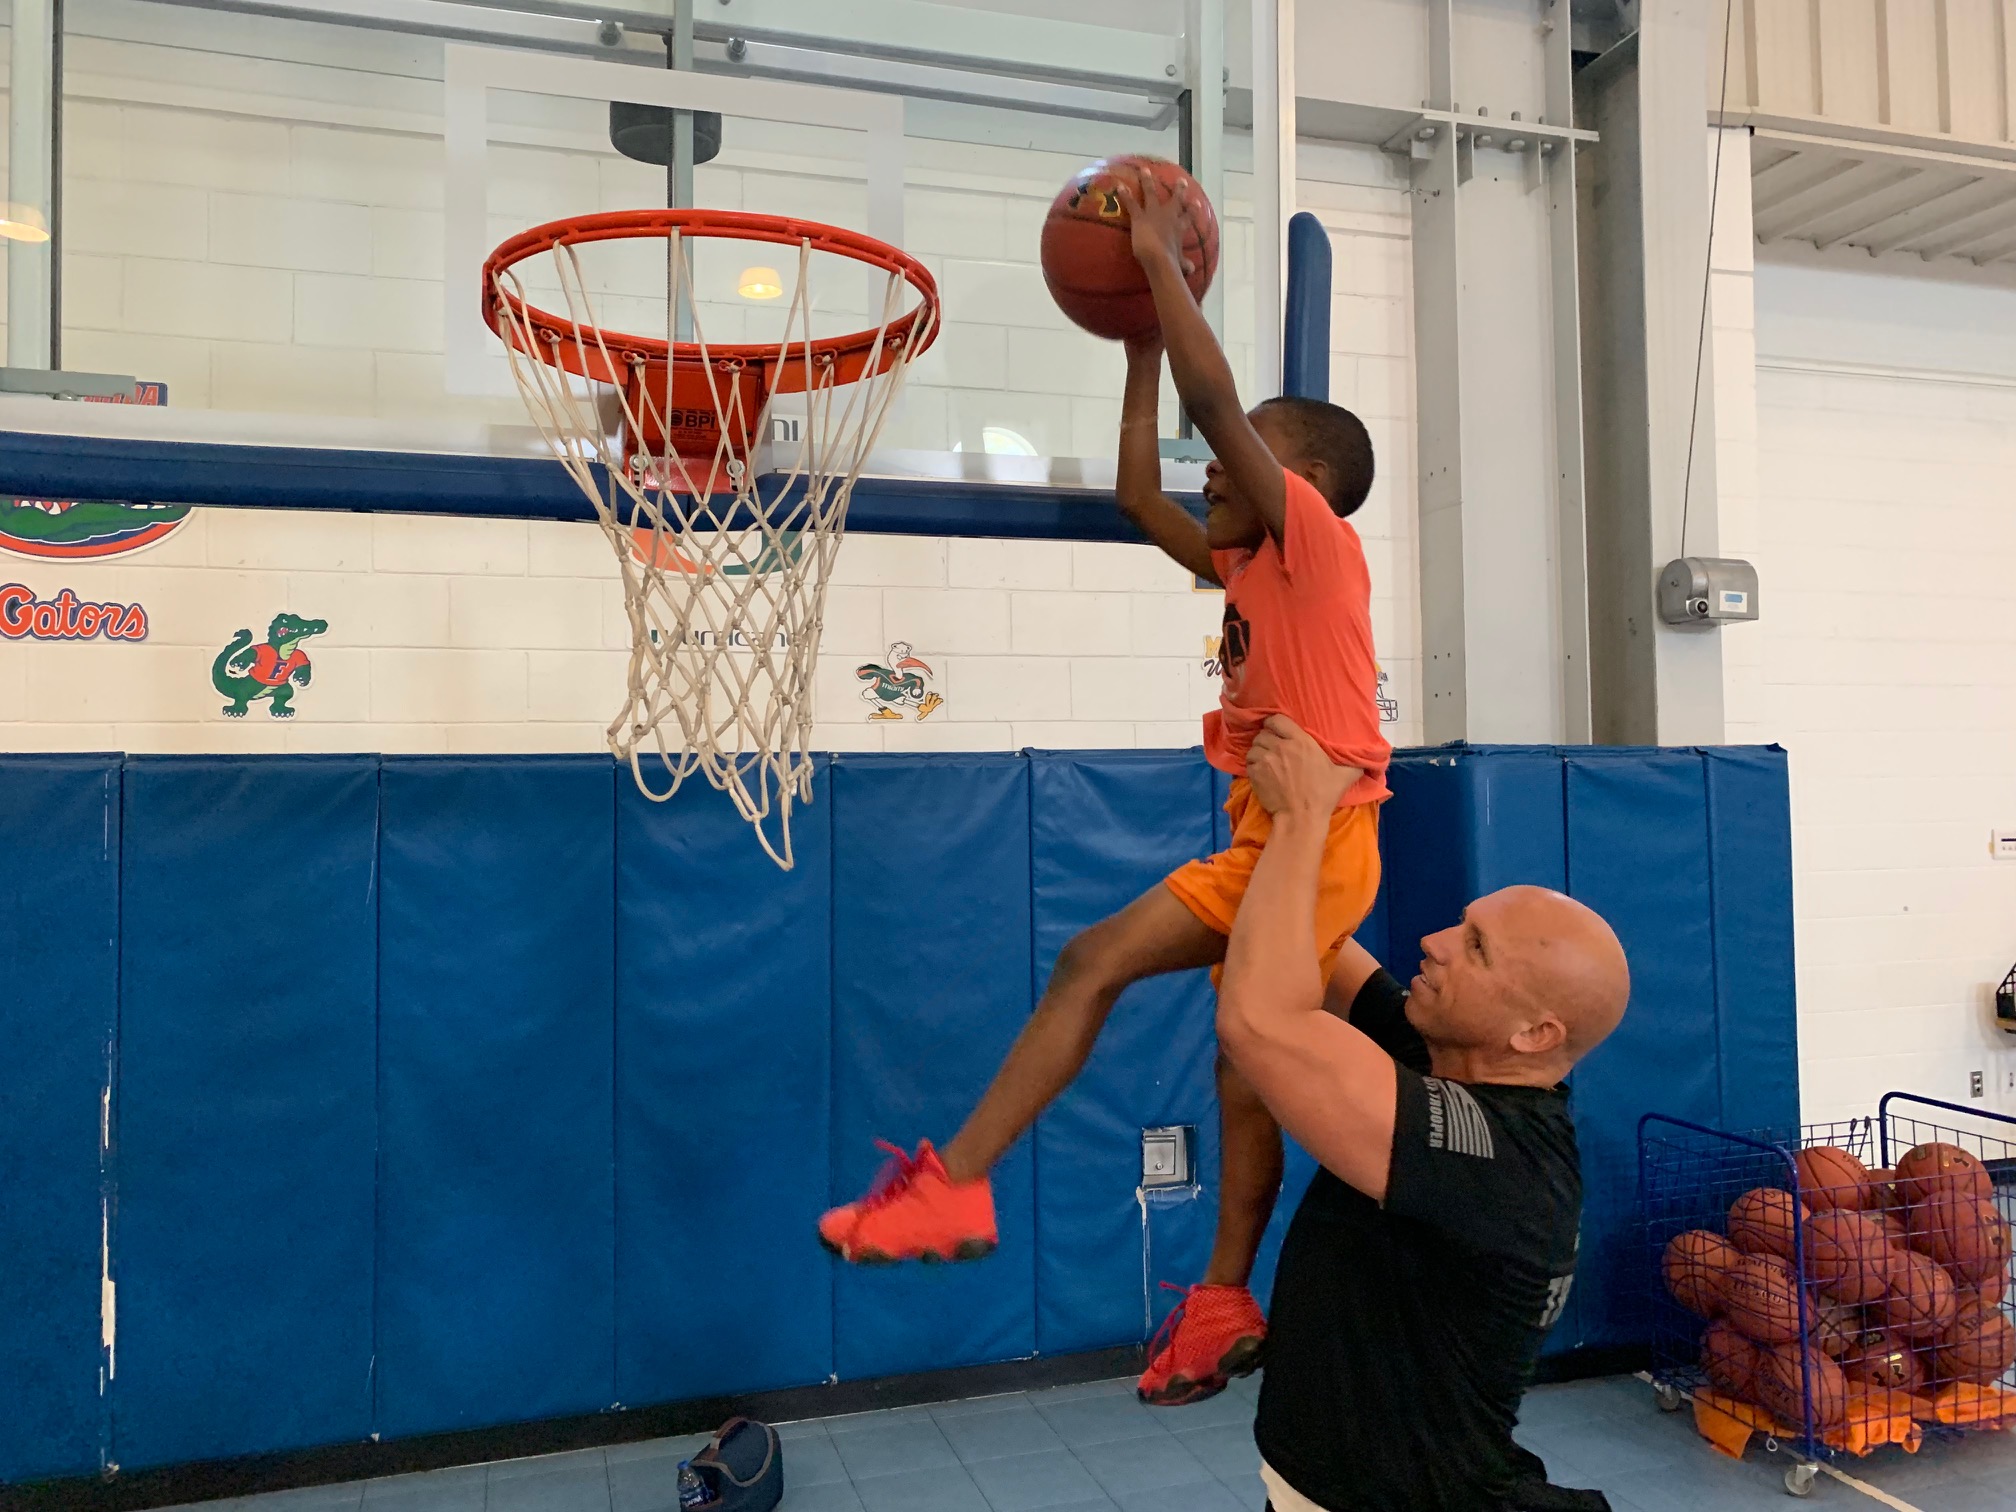 Lt. Greg Bueno helping a member of the Boys & Girls Clubs of Collier County dunk a basketball